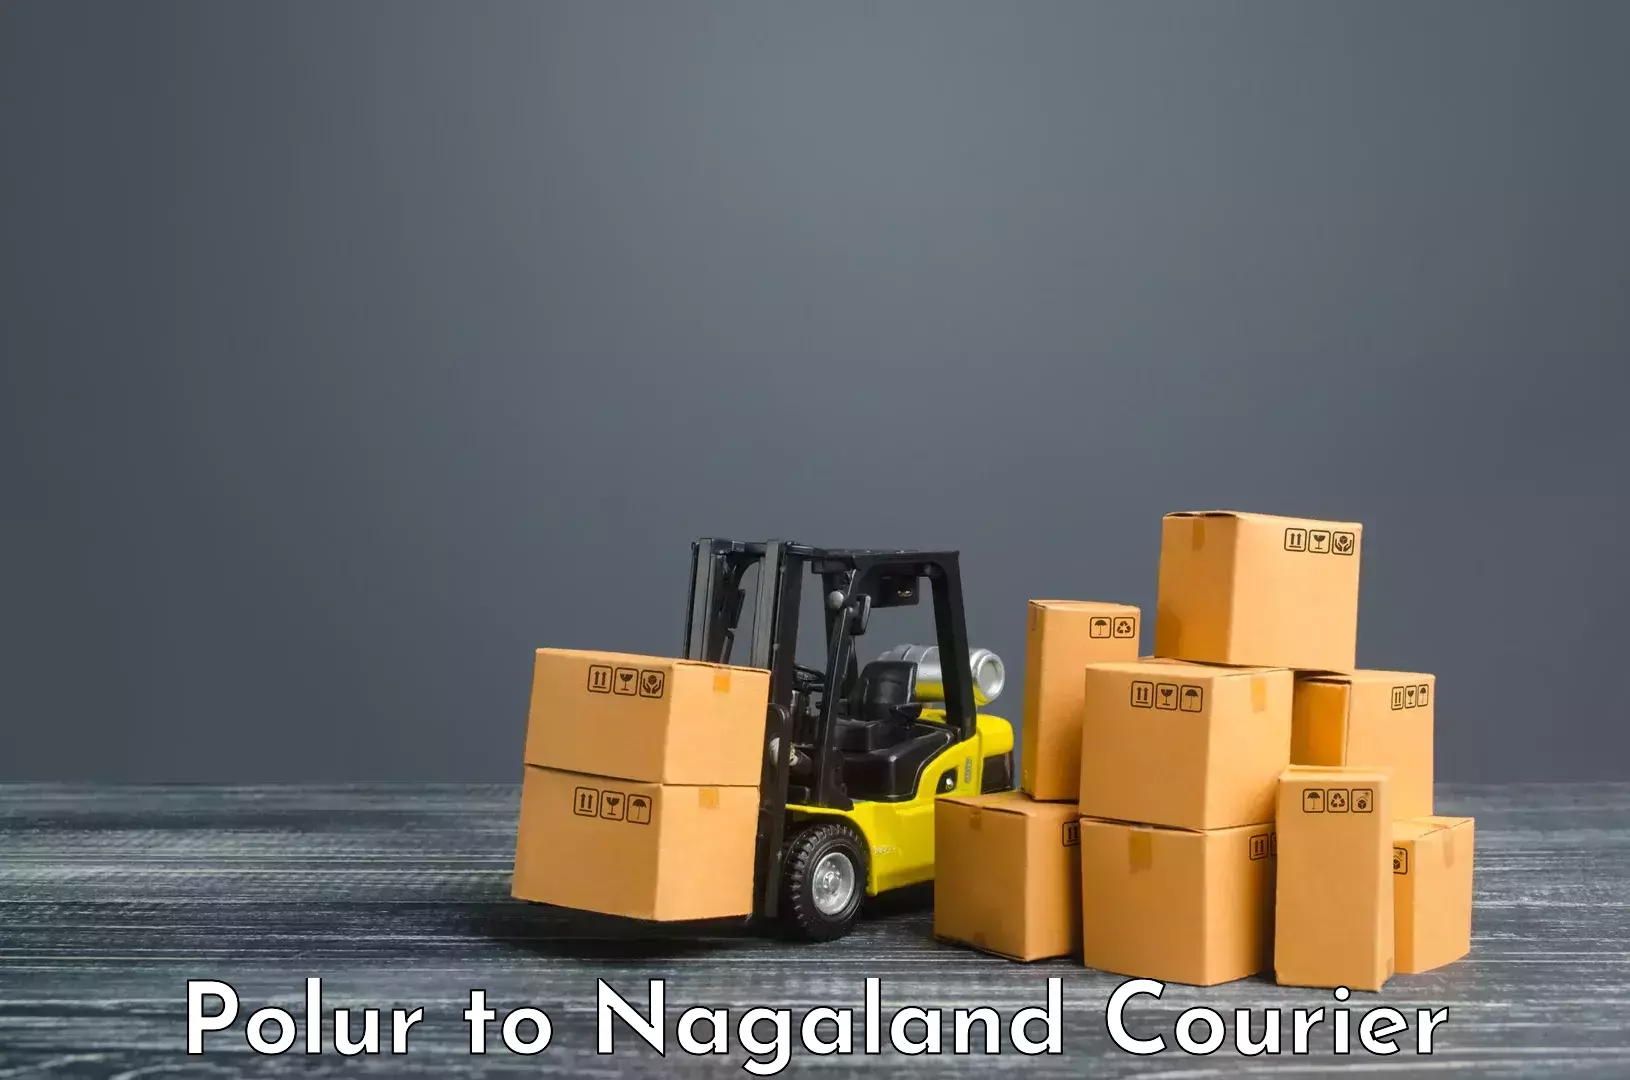 Subscription-based courier Polur to Nagaland